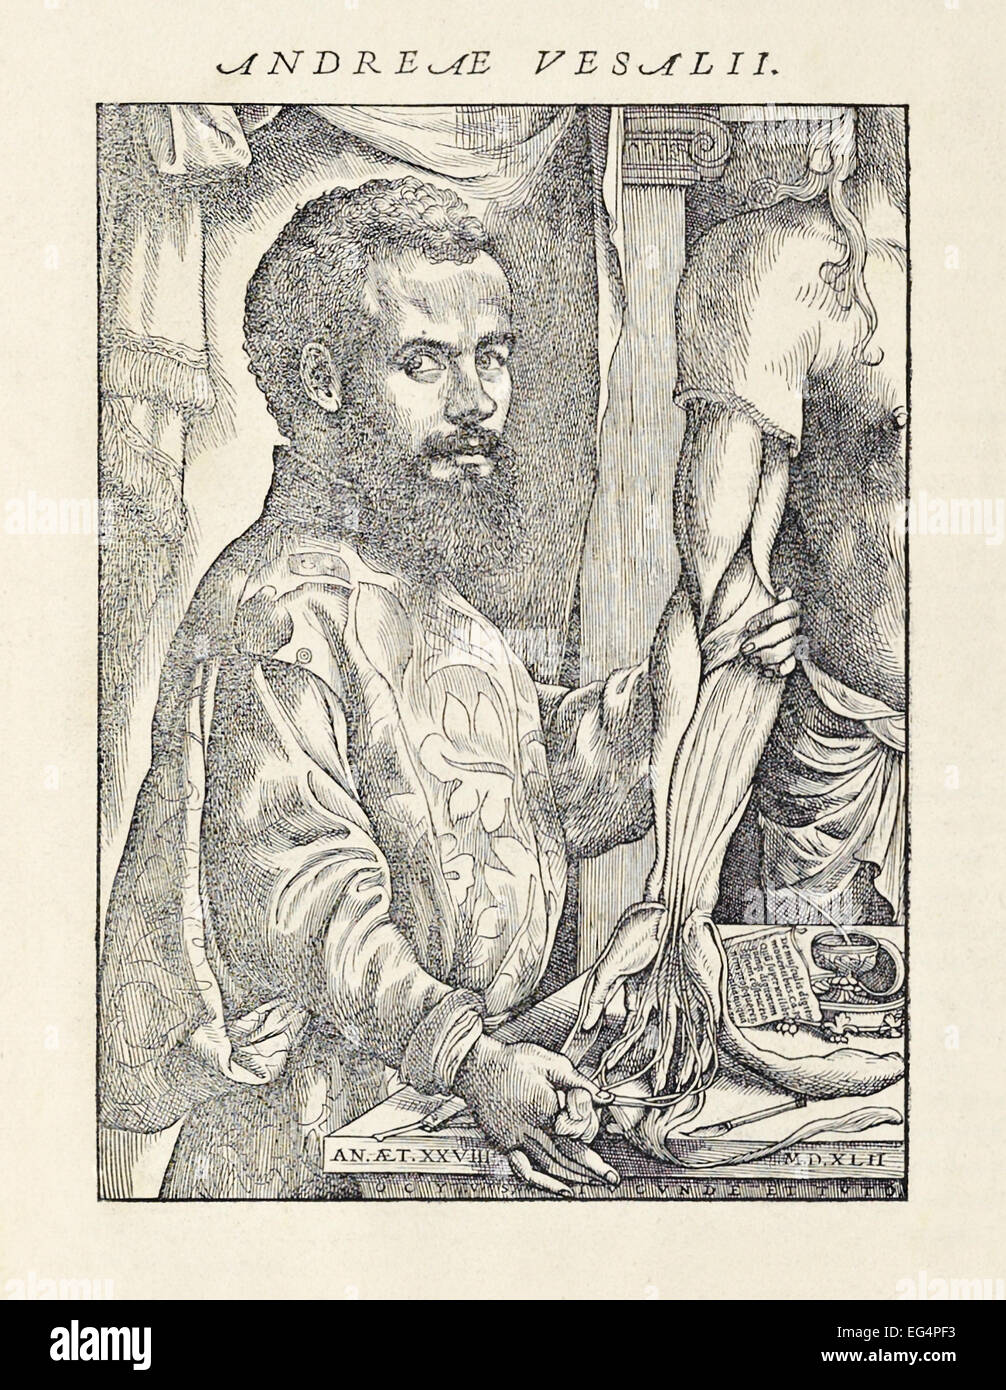 Woodcut portrait of Andreas Vesalius (1514-1564) with dissected cadaver from his book 'De humani corporis fabrica libri septem' published in 1543. See description for more information. Stock Photo